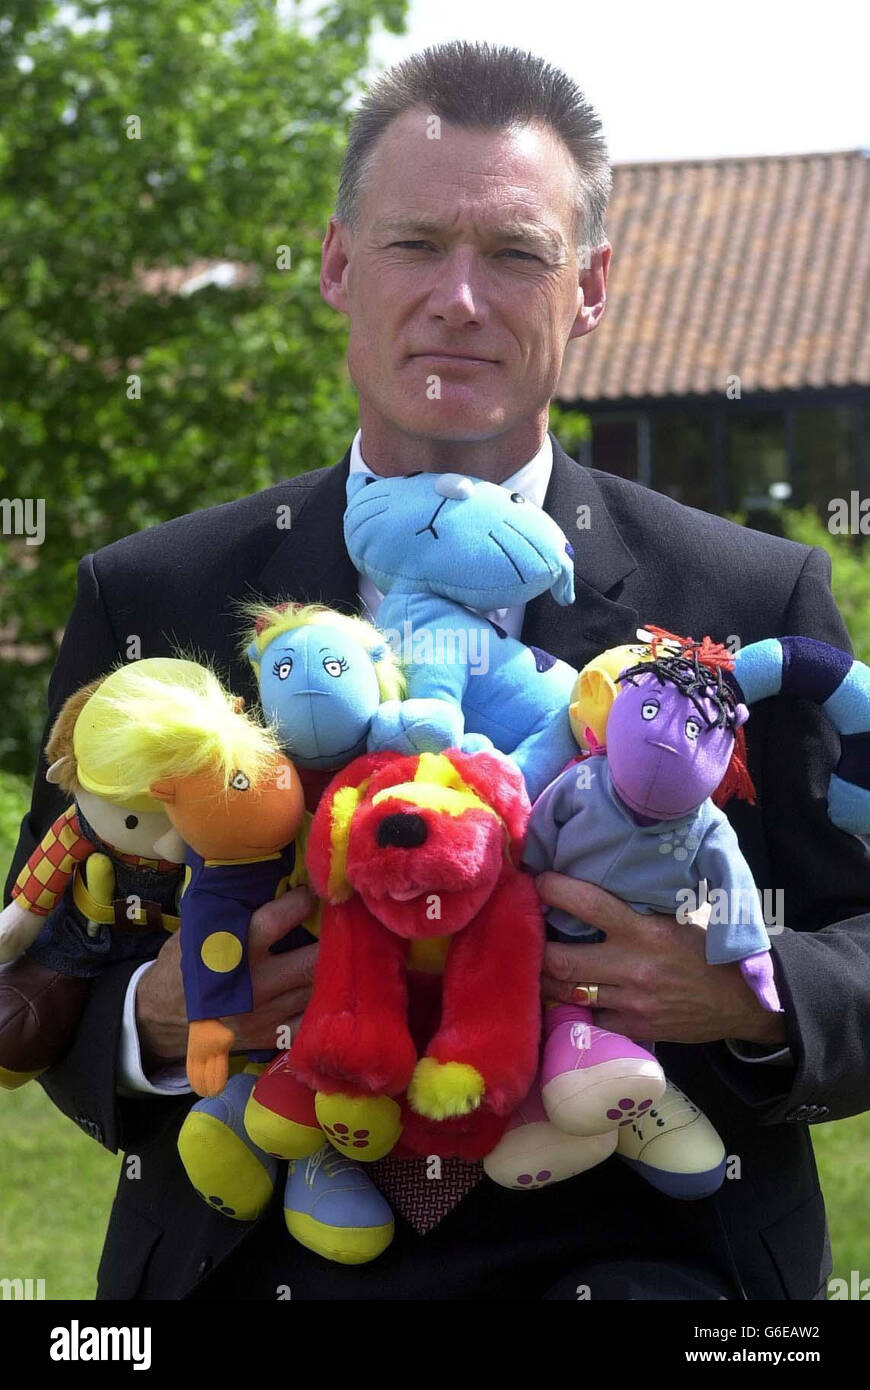 Steve Holland, Head of Trading Standards for Norfolk County Council, holds a selection of fake soft toys, some of the thousands of counterfeit products retrieved after the arrest of Philip Butterworth, who appeared at Norwich Crown Court , * following his extradition last night from Spain. Butterworth, from Harrogate, North Yorkshire, was sentenced in August 2002 to two-and-a-half years for supplying counterfeit goods, but disappeared while on bail and fled to Marbella. The case was adjourned until 27th June 2003. Stock Photo